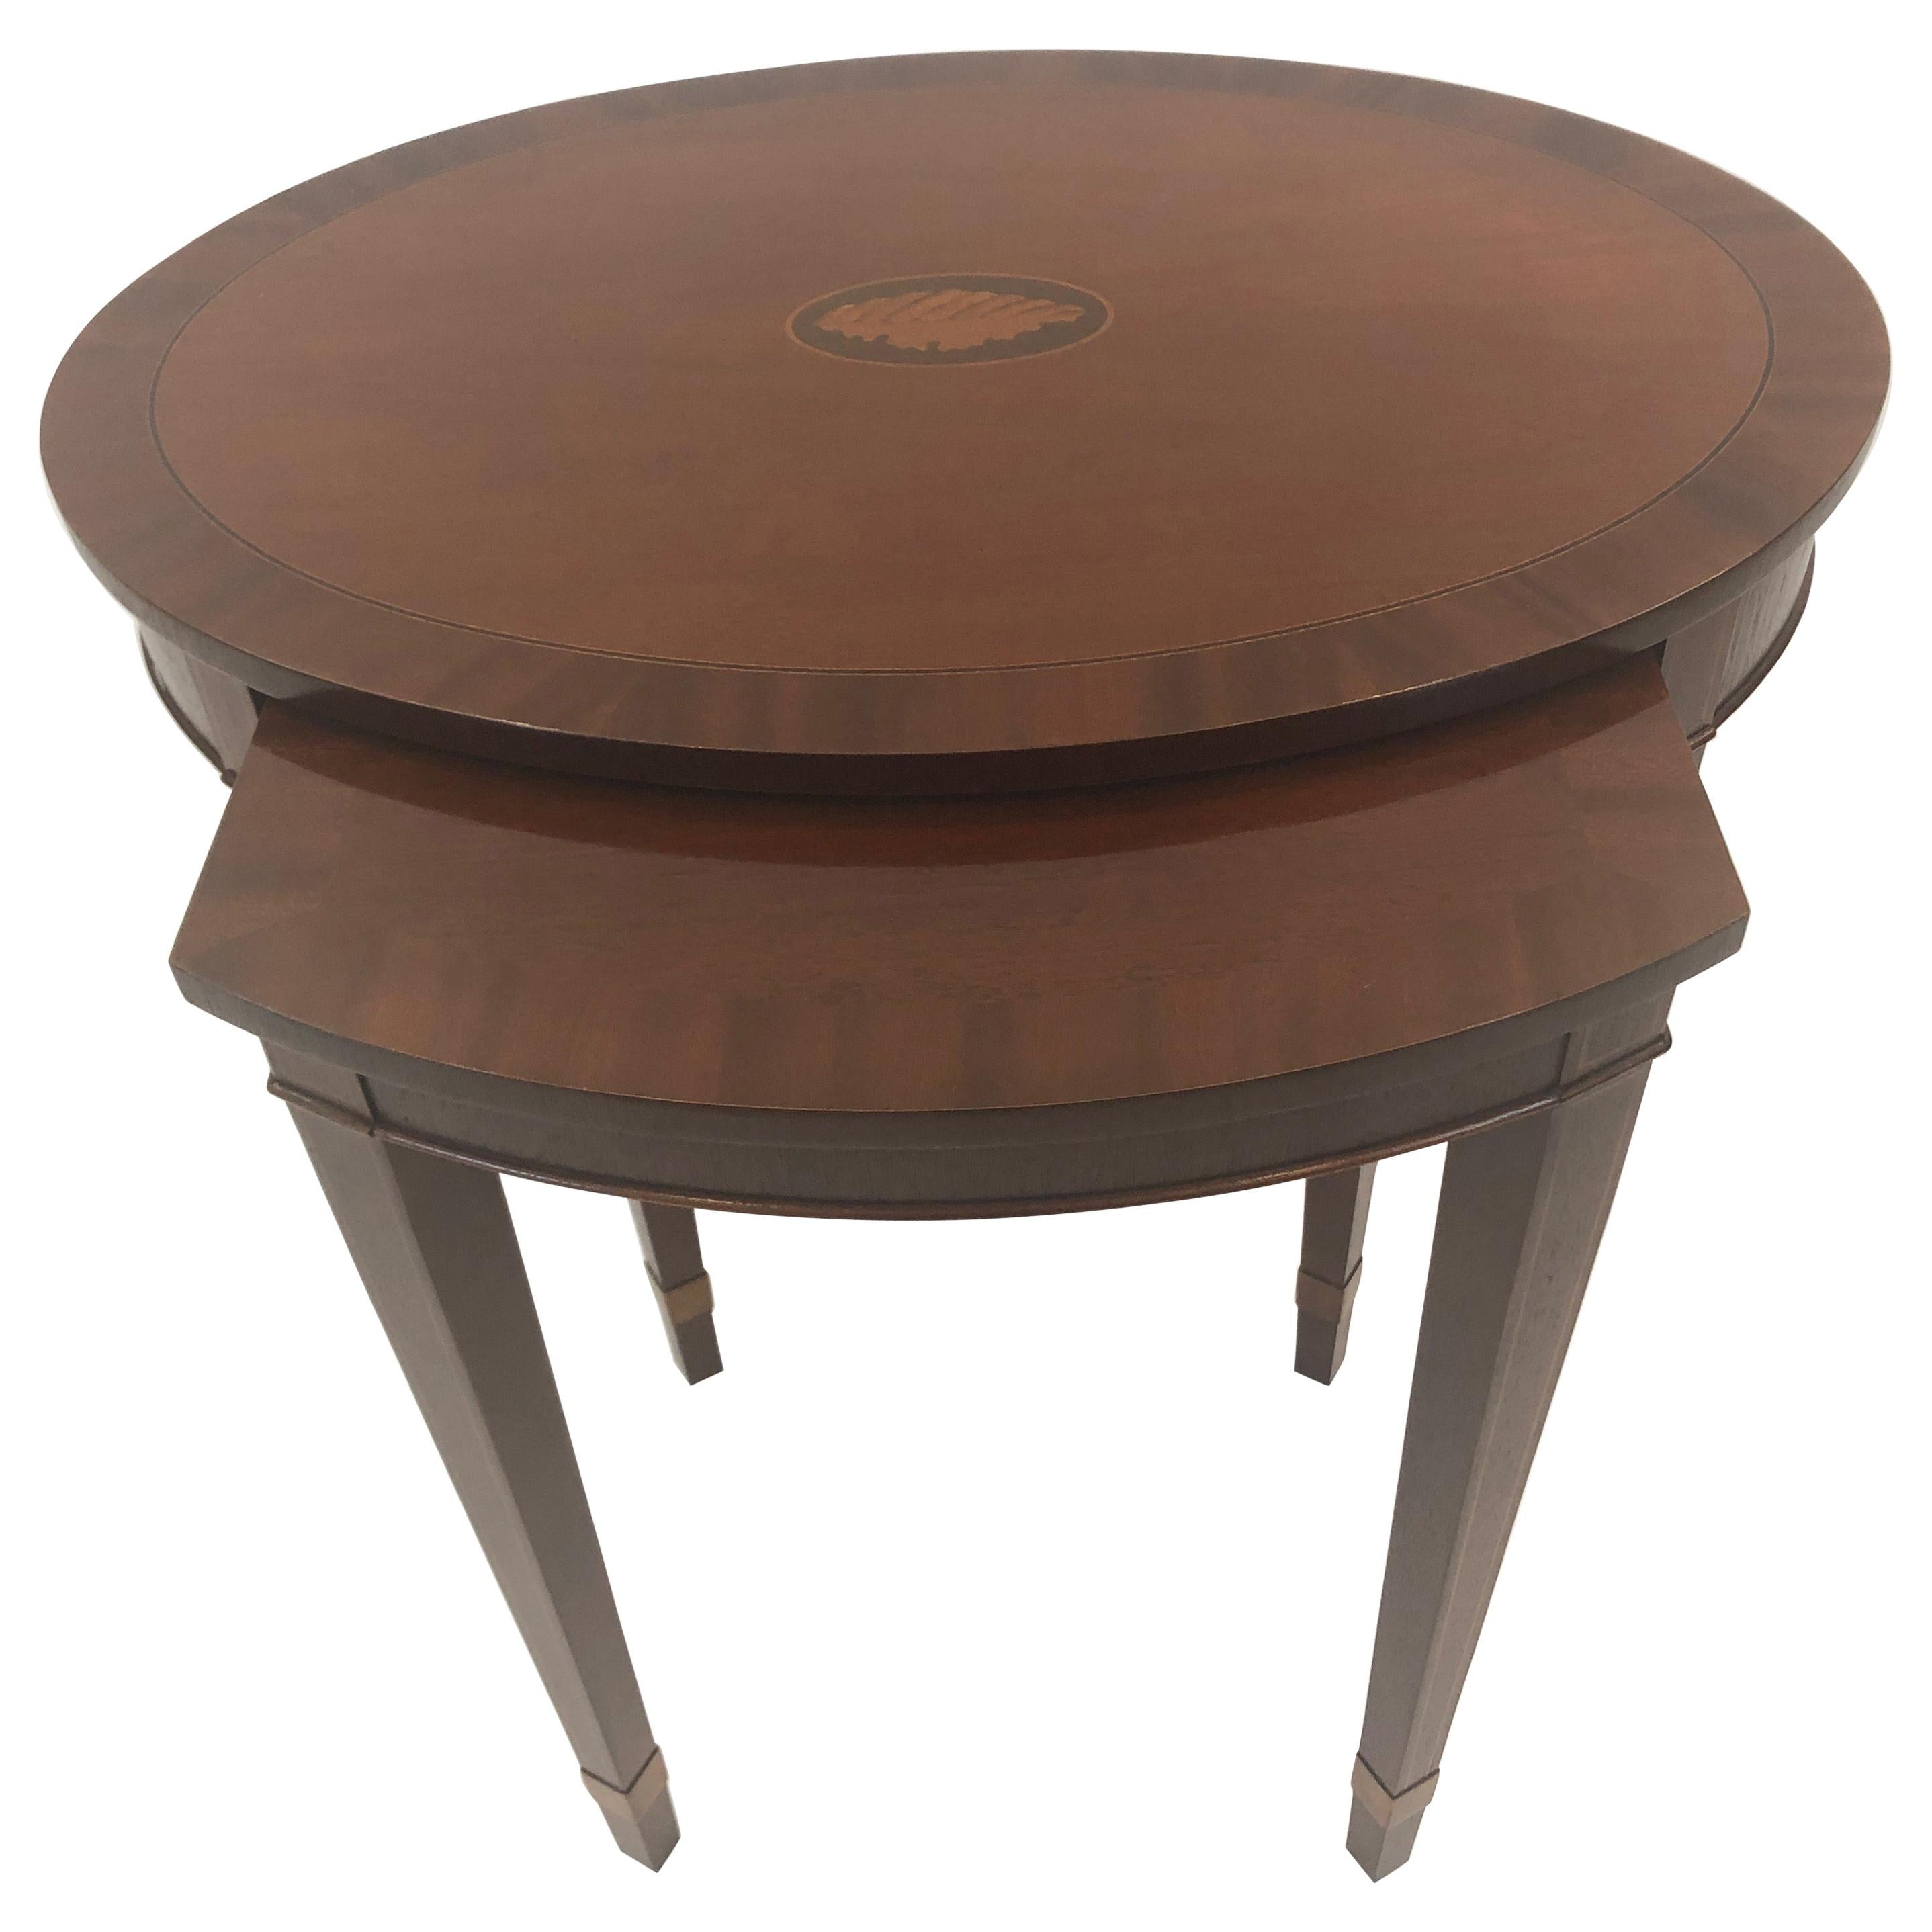 Handsome Oval Mixed Wood Inlaid Nesting Tables by Baker